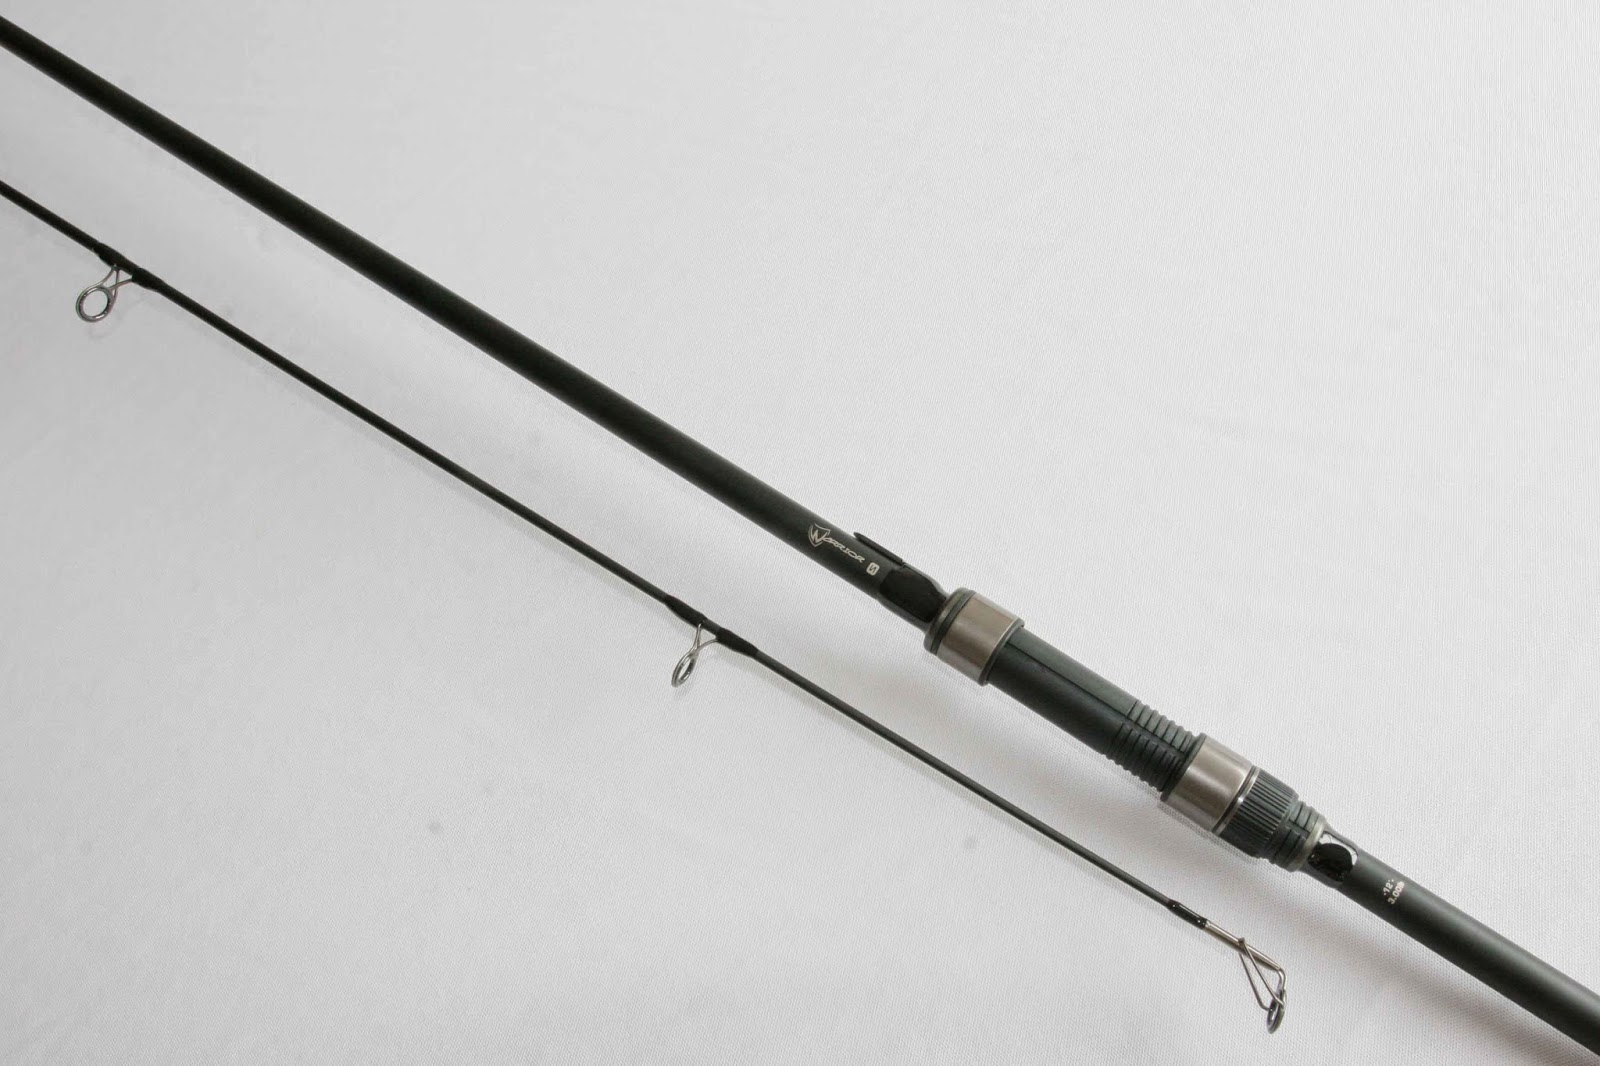 Duncan Charmans World of Angling: 3LB TEST CURVE RODS UNDER £120